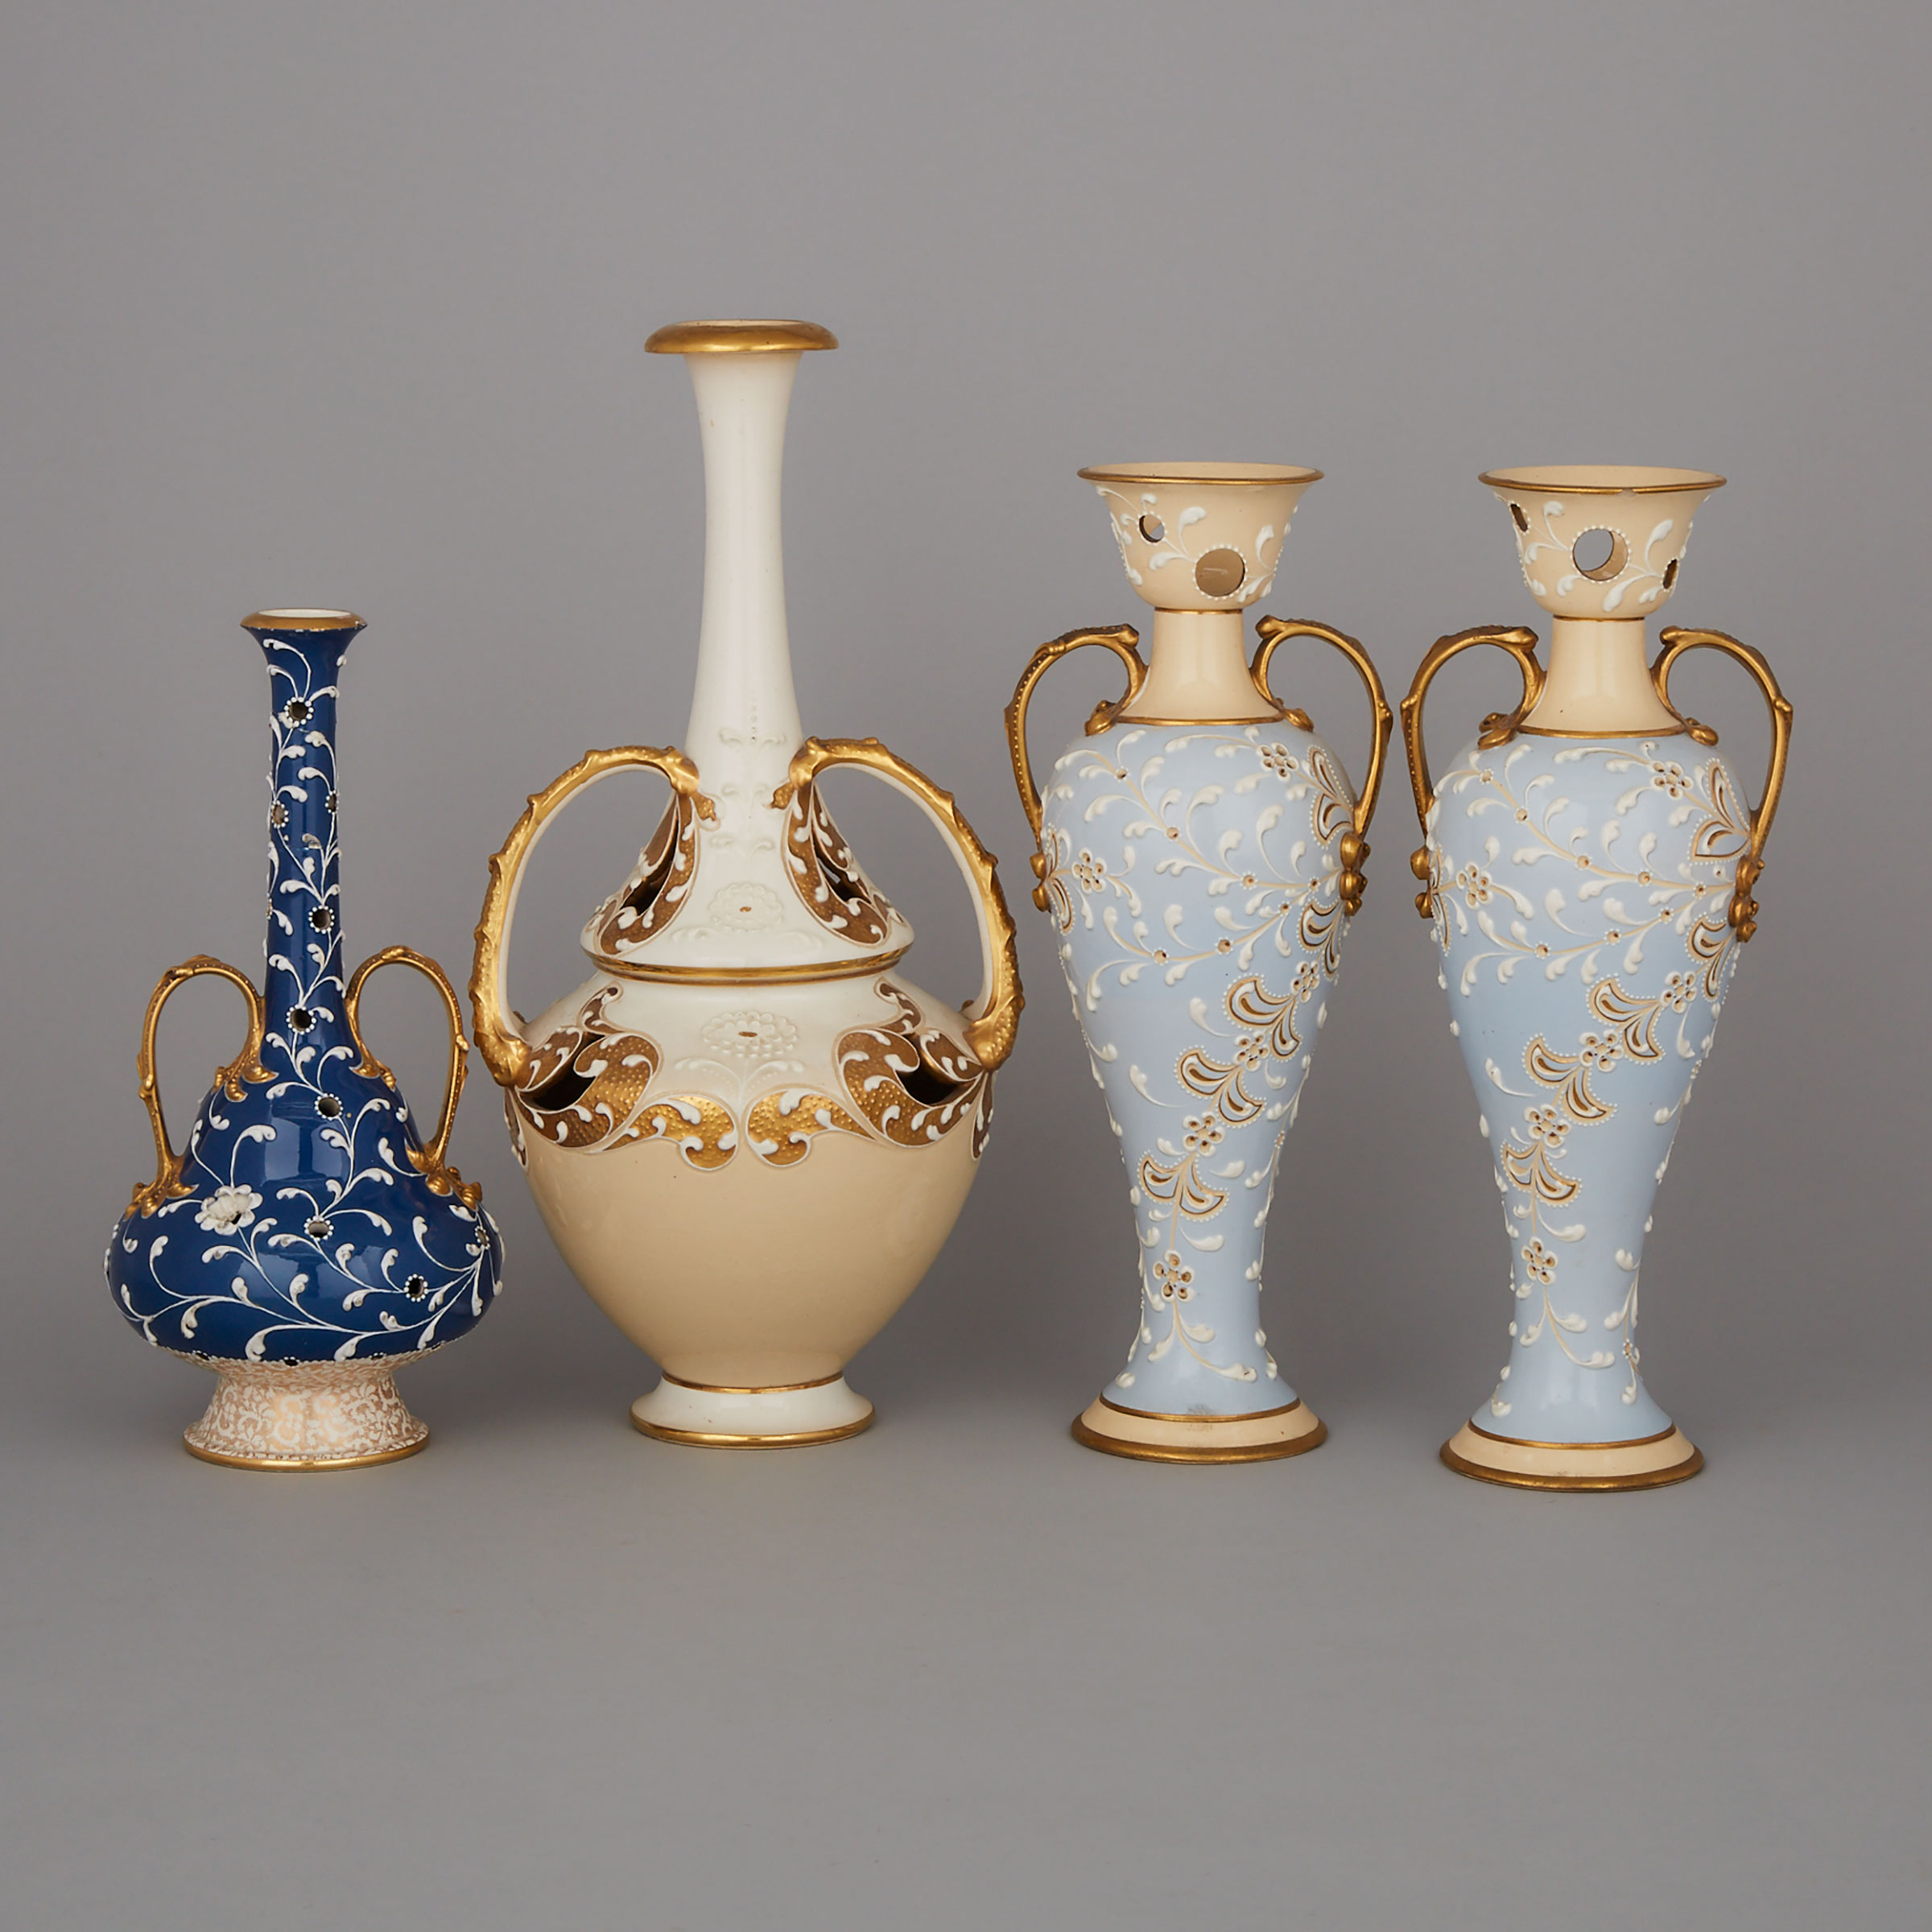 Pair and Two Single Wedgwood Slip Decorated Two-Handled Vases, Harry Barnard, c.1900